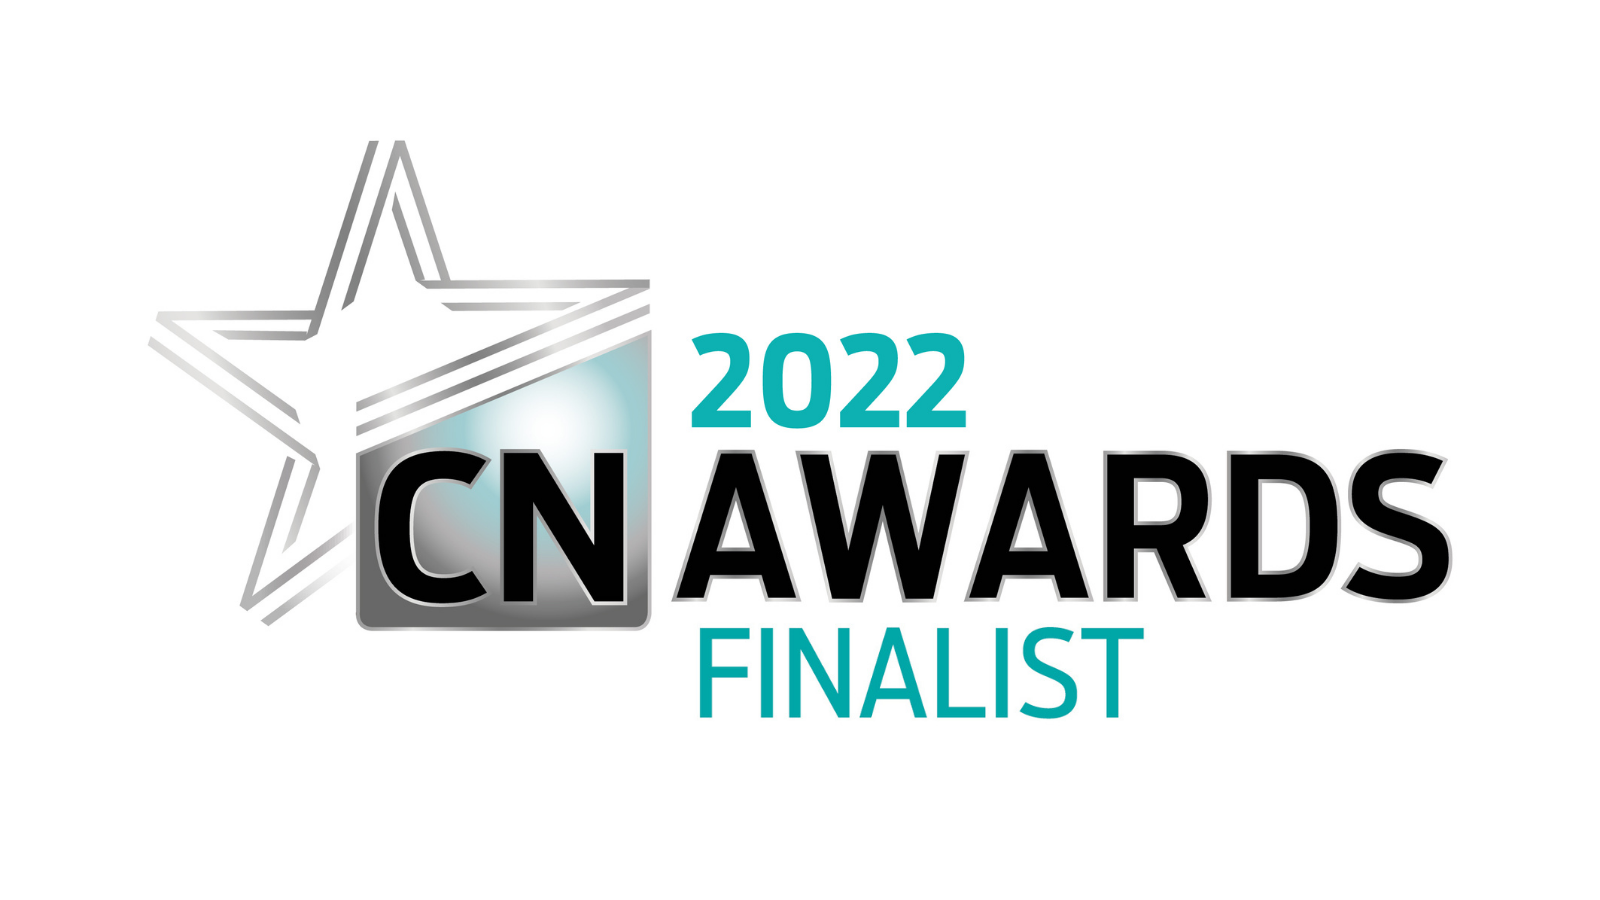 Milestone Infrastructure shortlisted for two environmental awards at this year’s Construction News Awards